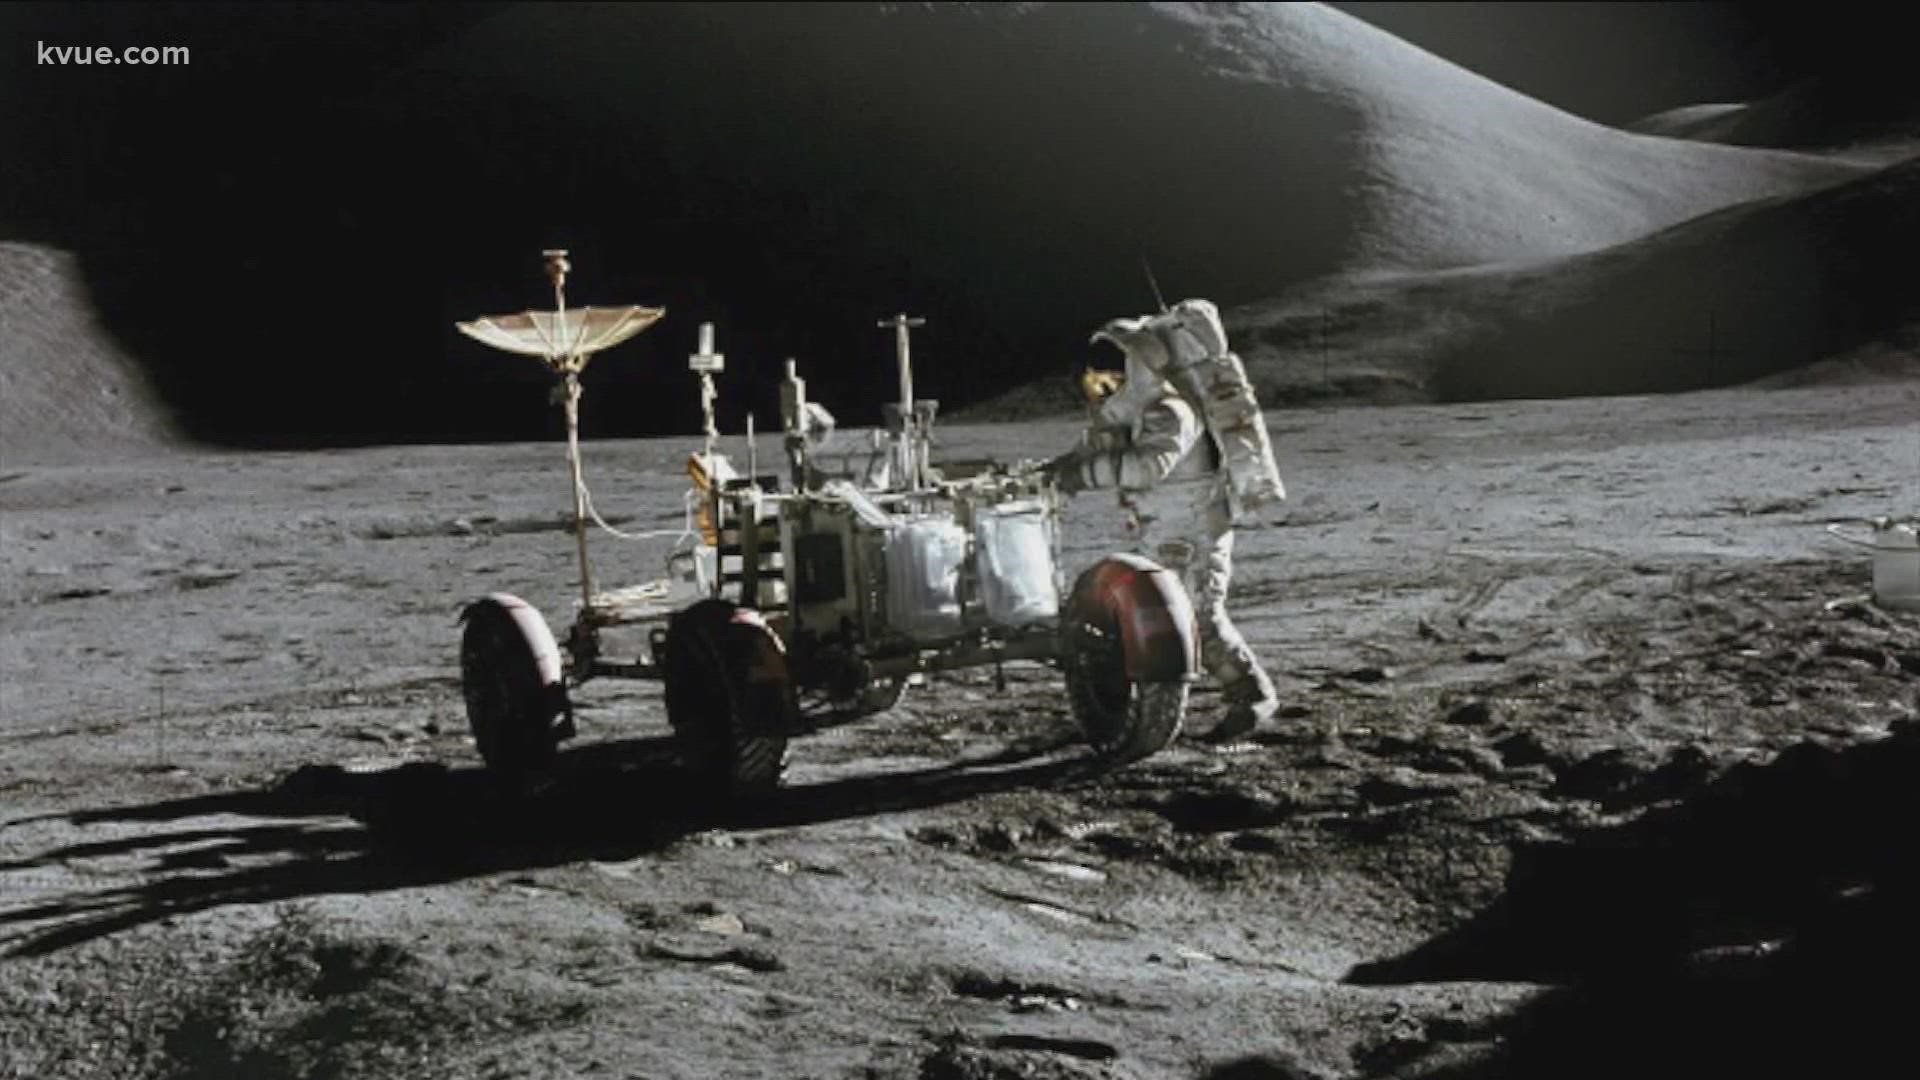 Apollo 15 was the fourth time the U.S. sent astronauts to the moon. But it was the first time they traveled on the surface in a lunar roving vehicle.